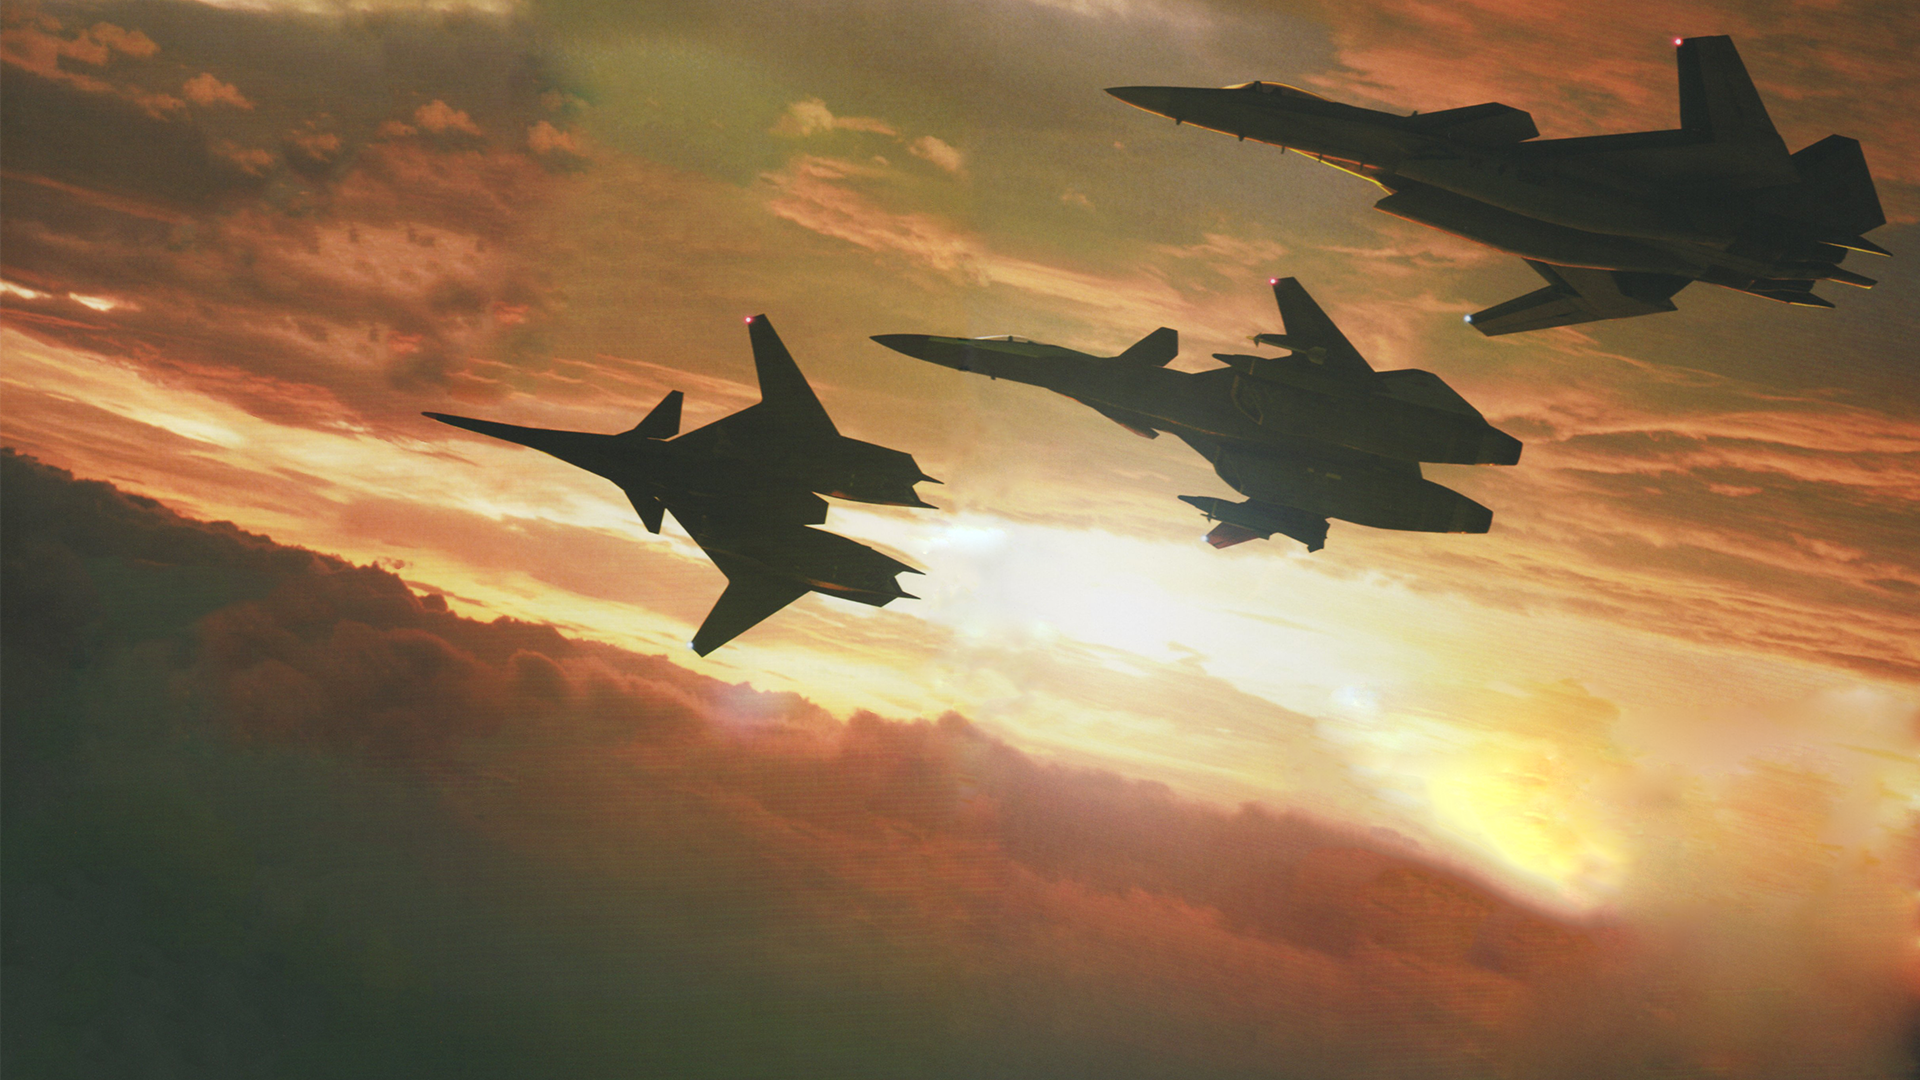 Some Ace Combat Wallpapers